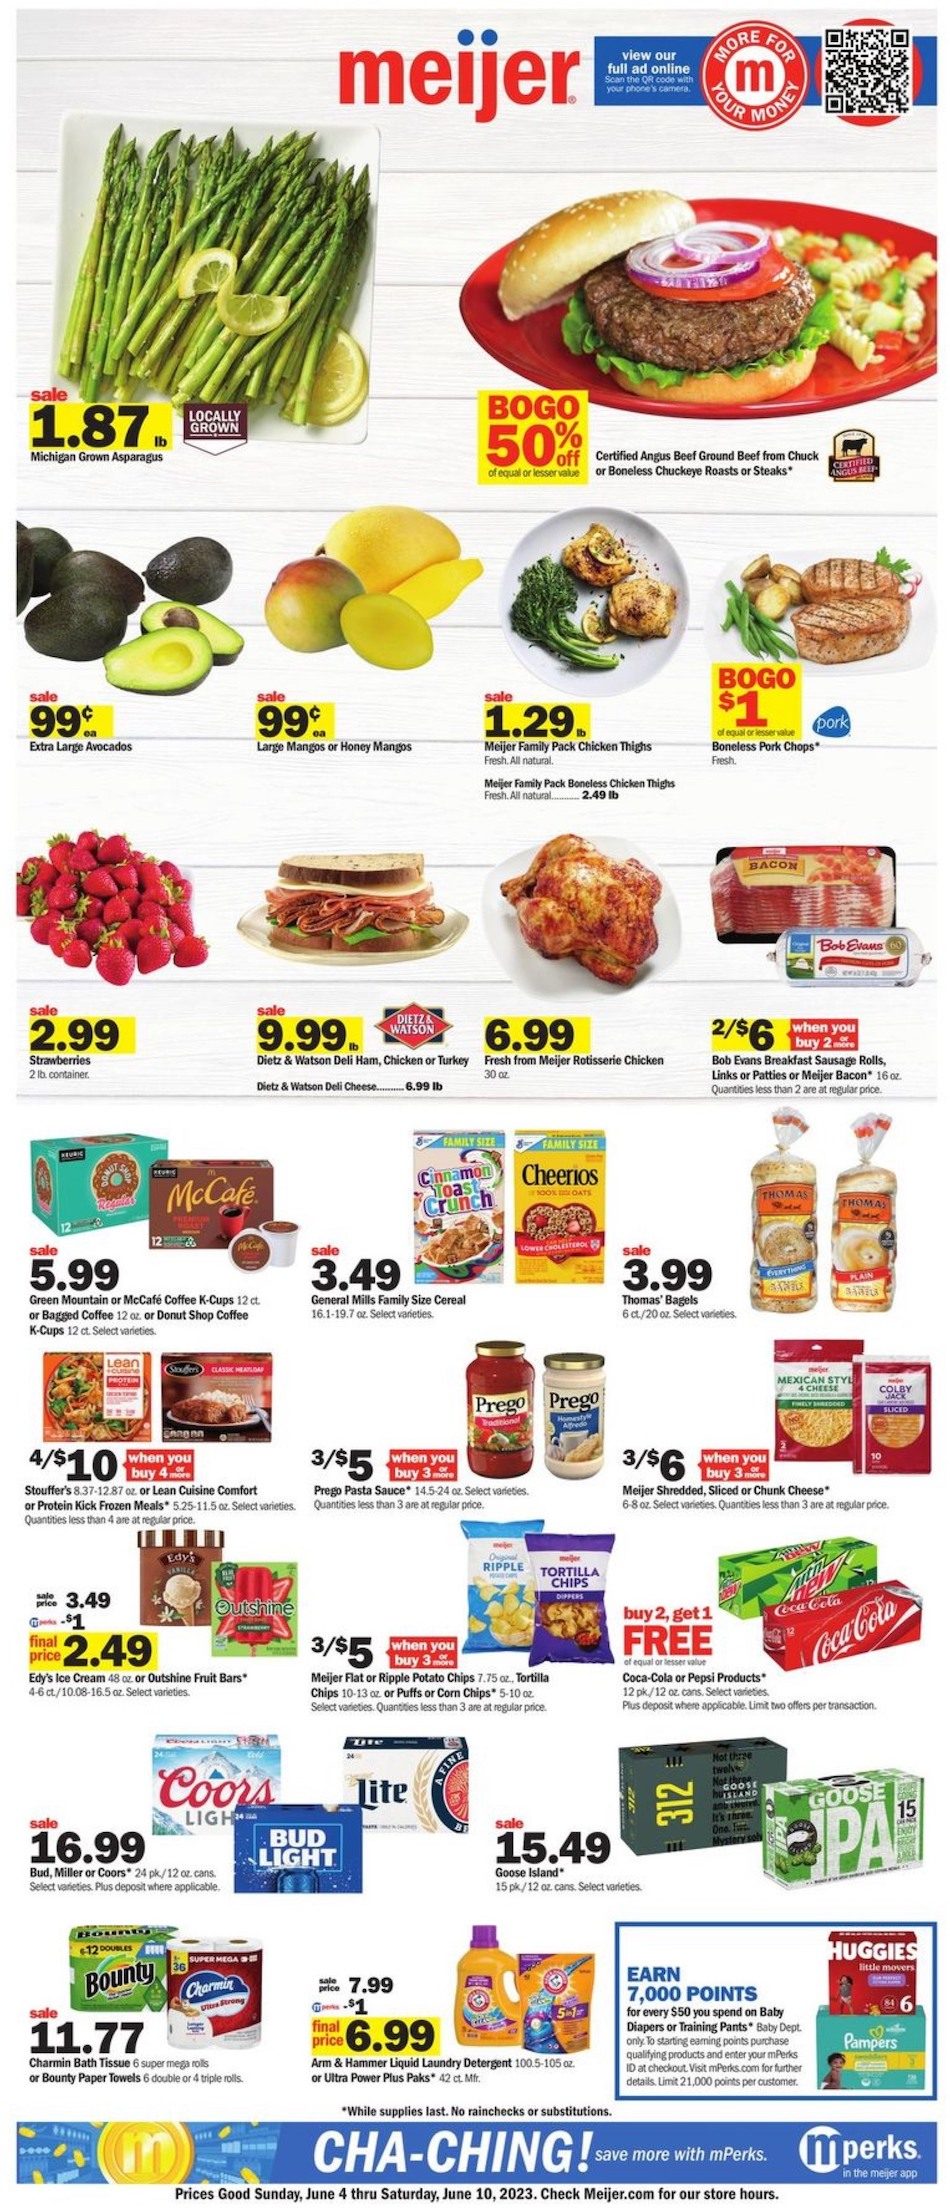 Meijer Weekly Ad 4th – 10th June 2023 Page 1